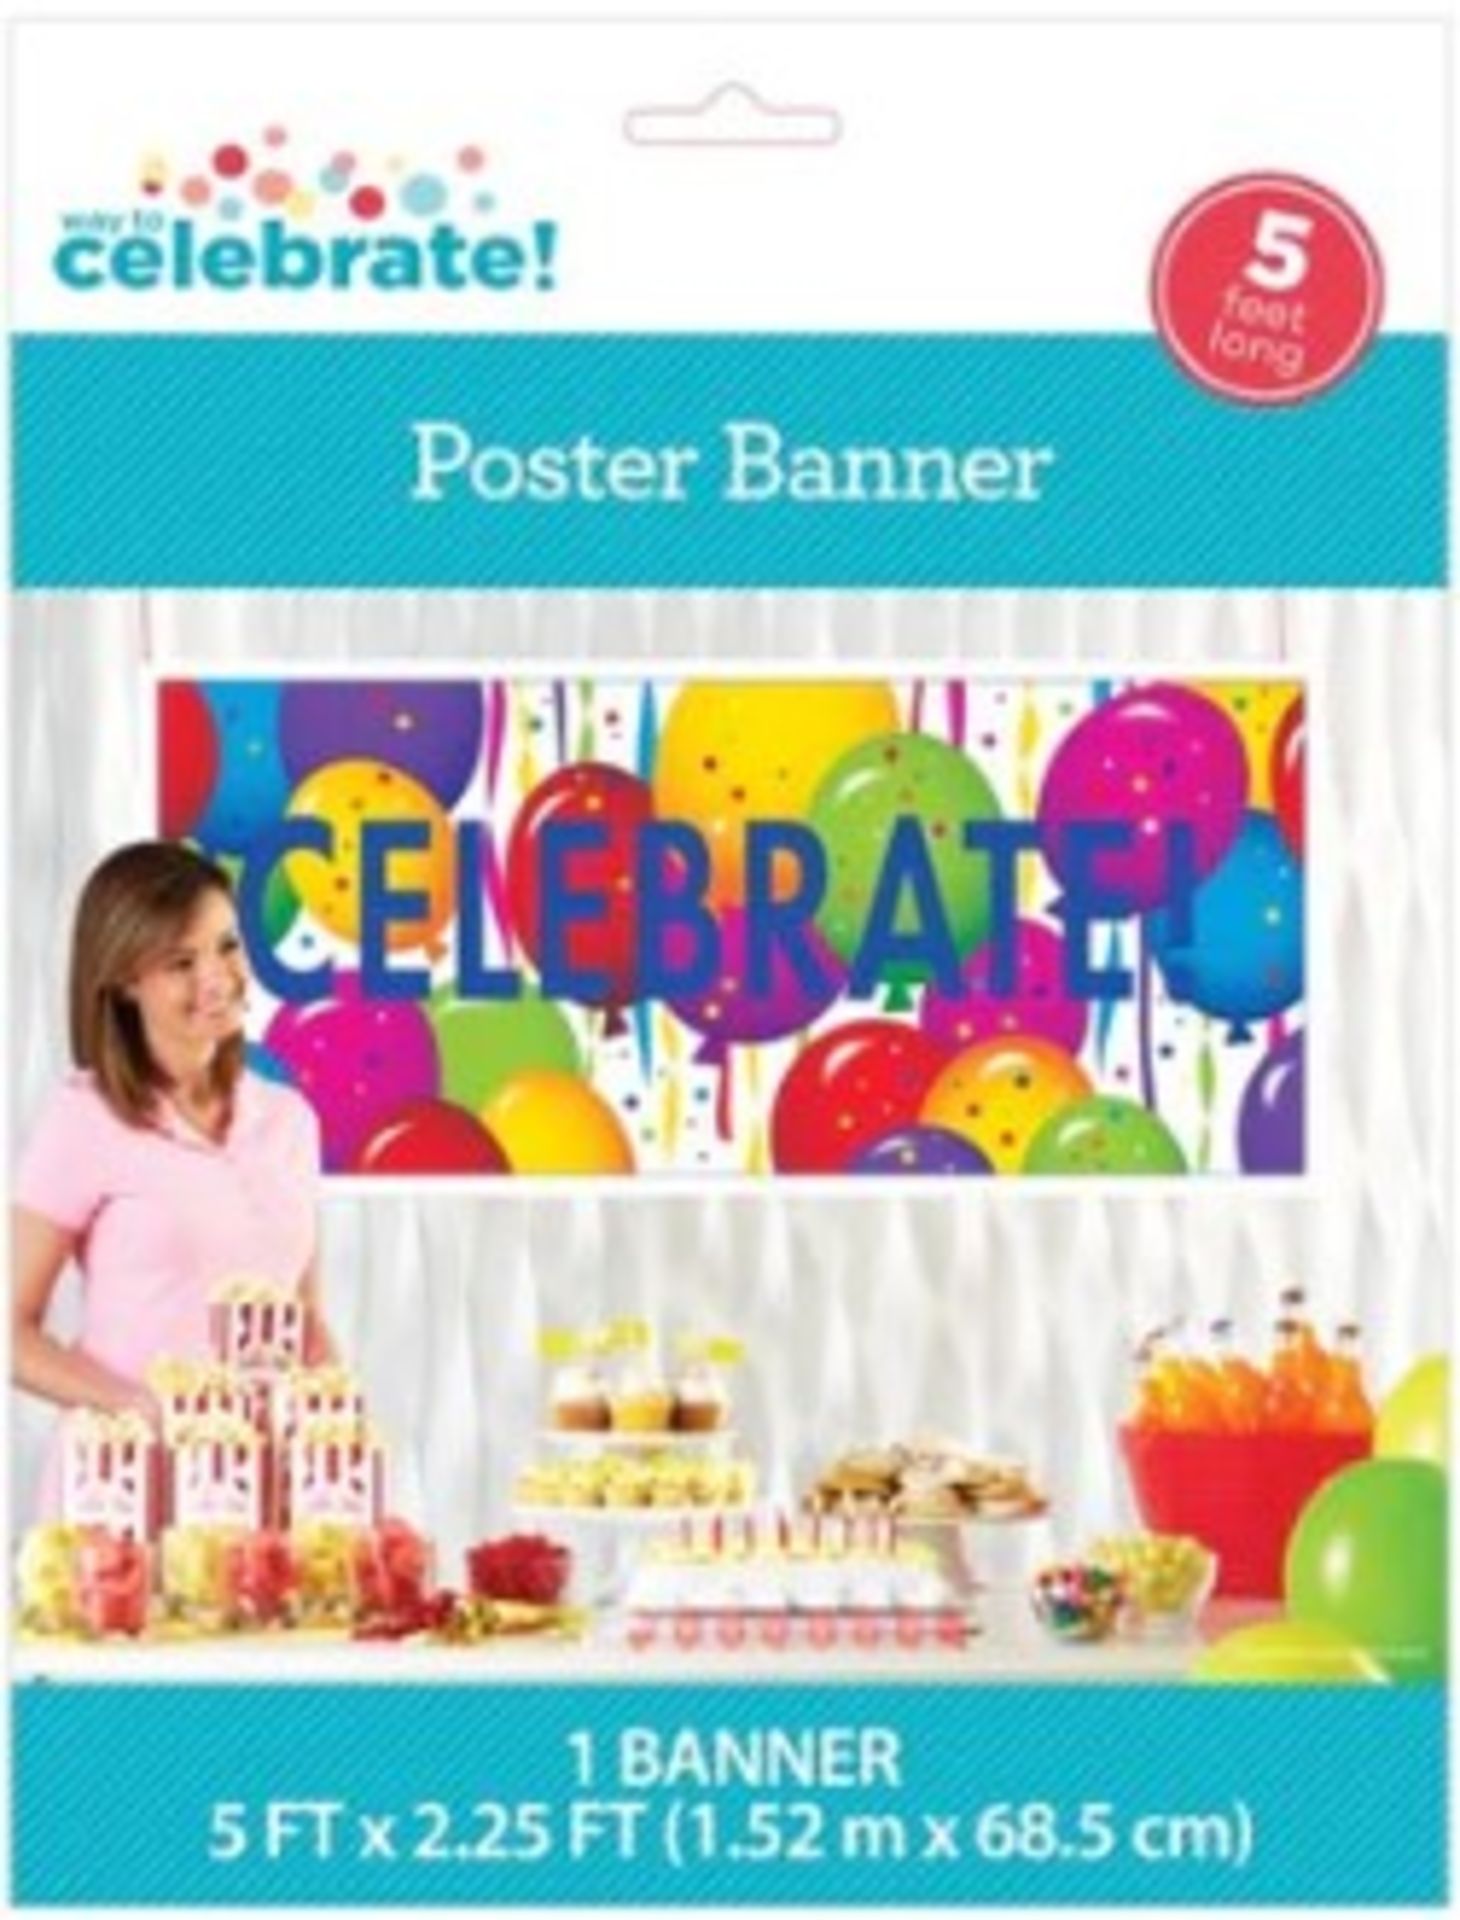 1000 COLOURFUL BIRTHDAY BANNERS FOR PARTIES - RANGE OF DESIGNS, RRP £10,000 - Image 2 of 5